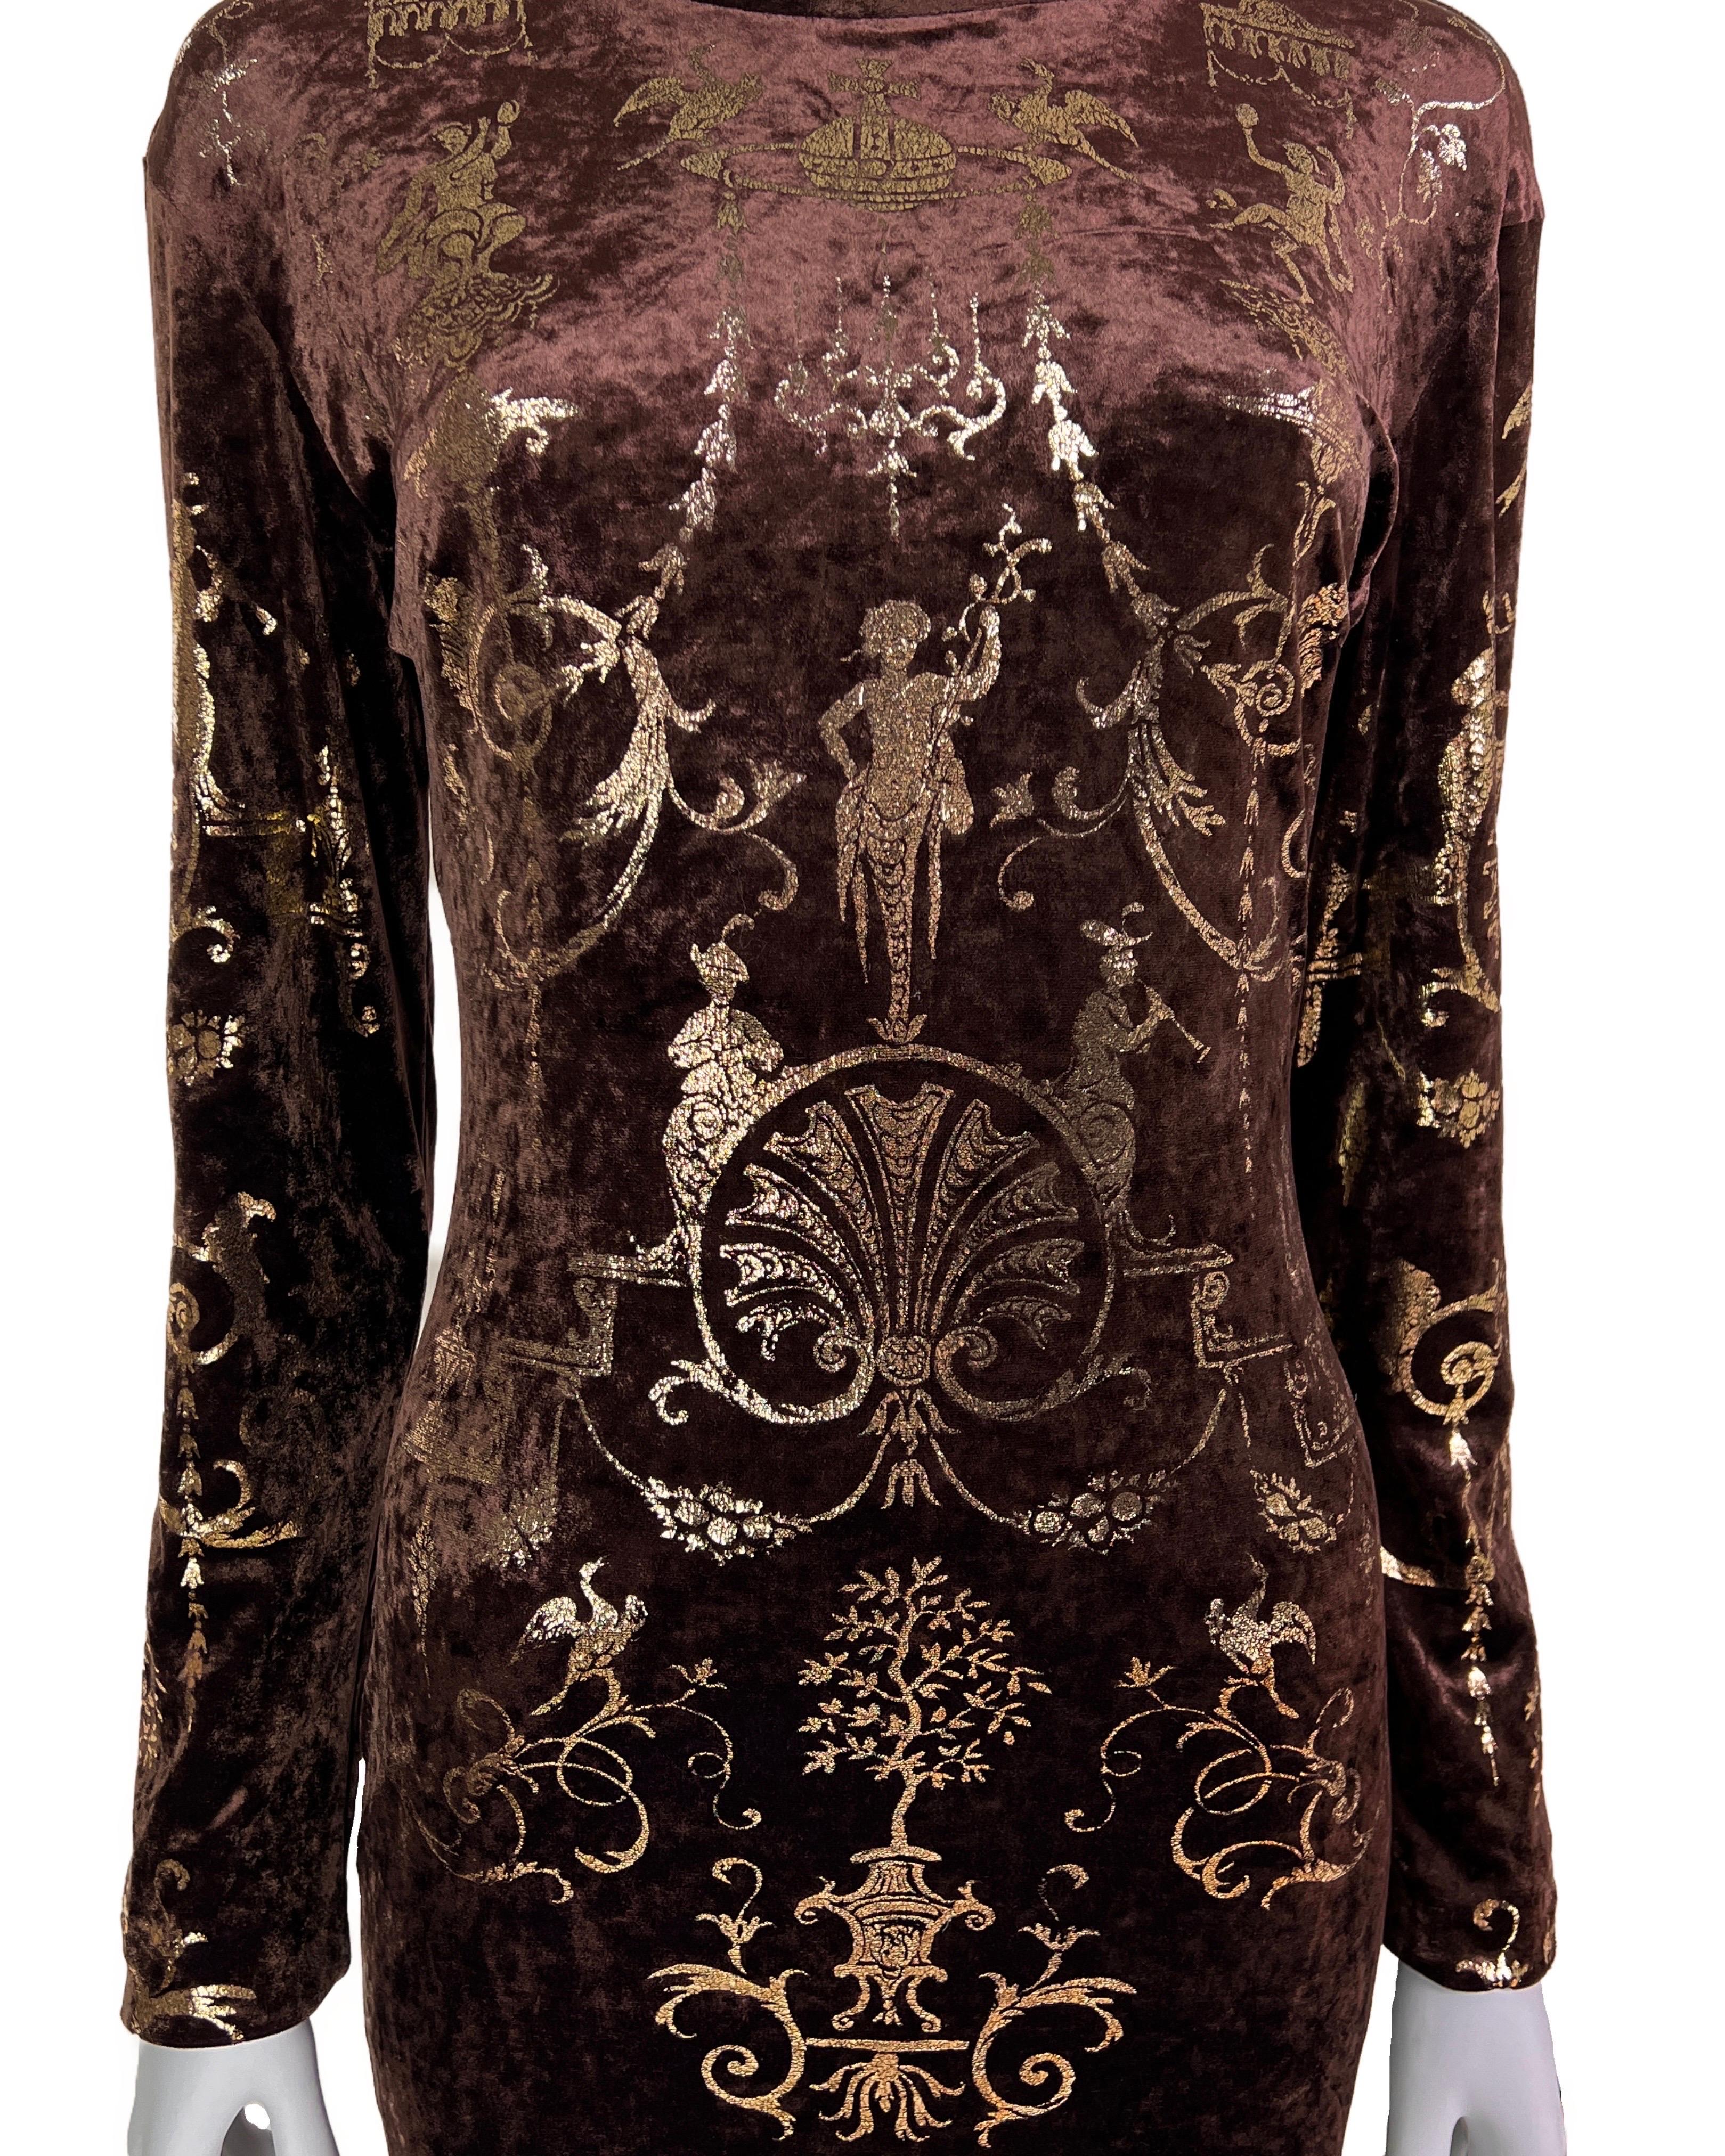 Women's Vivienne Westwood Fall 1990 “Portrait Collection” Foiled “Boulle” Printed Velvet For Sale